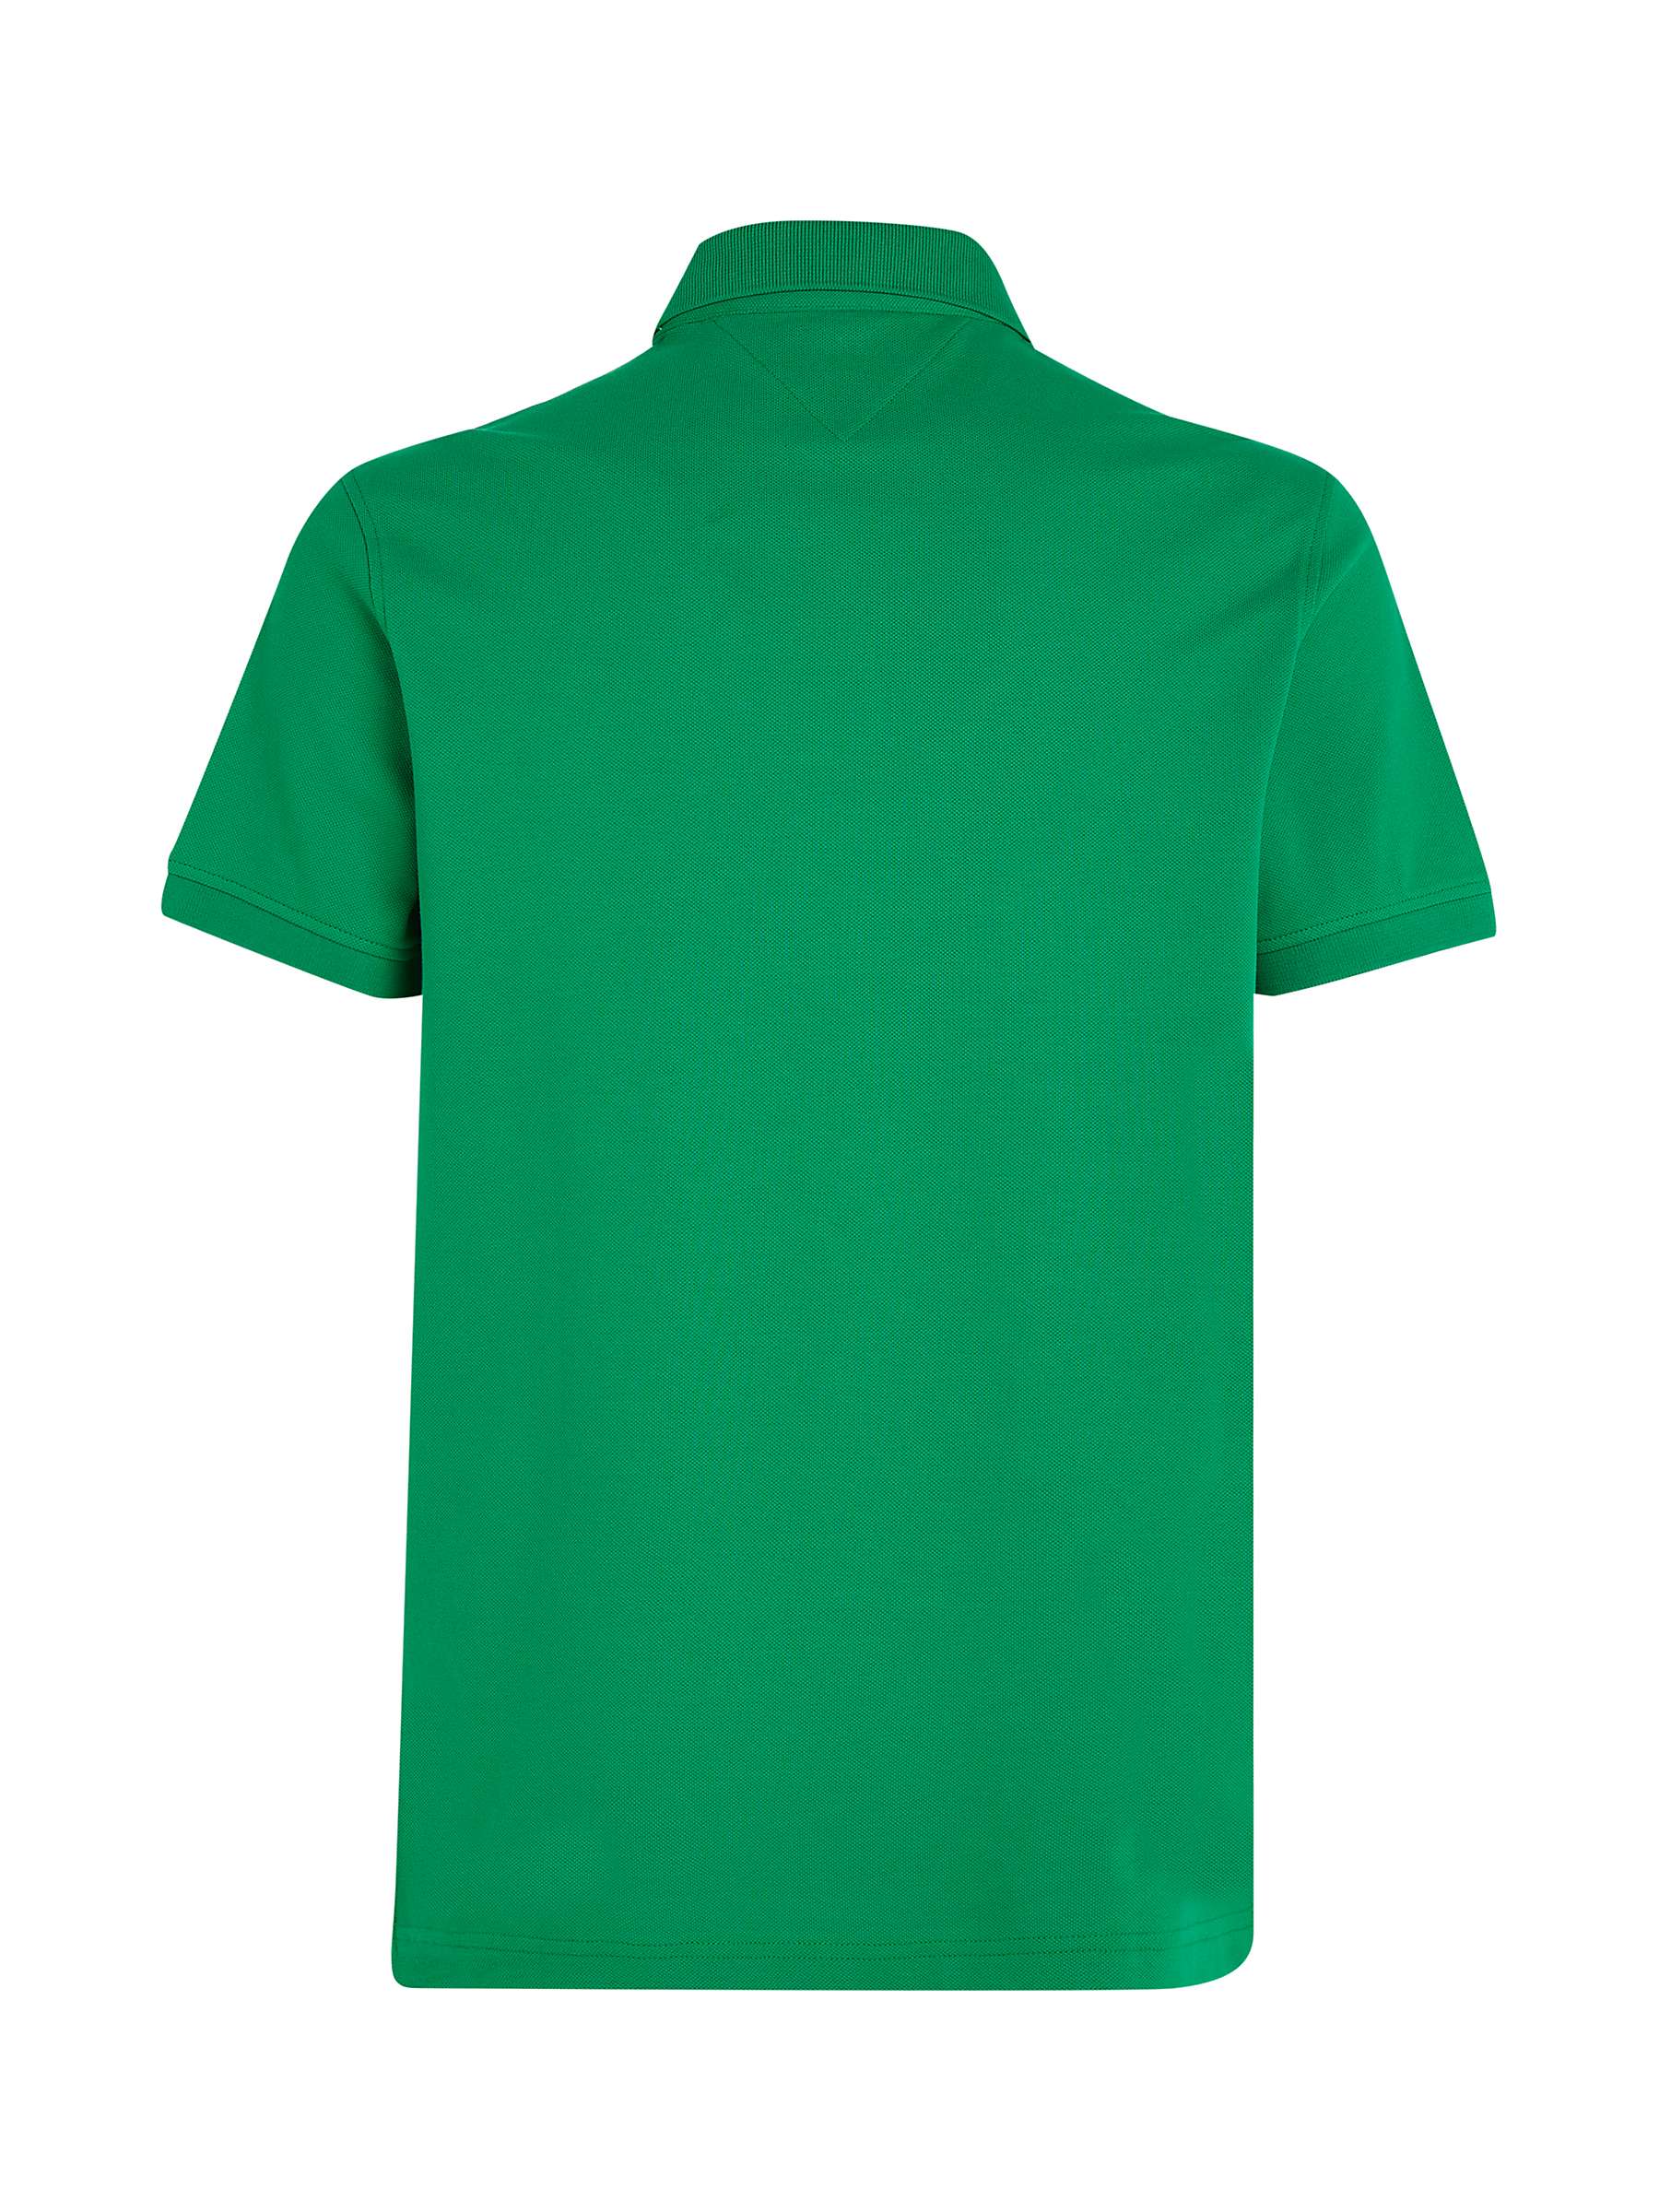 Buy Tommy Hilfiger 1985 Classic Short Sleeve Polo Shirt Online at johnlewis.com